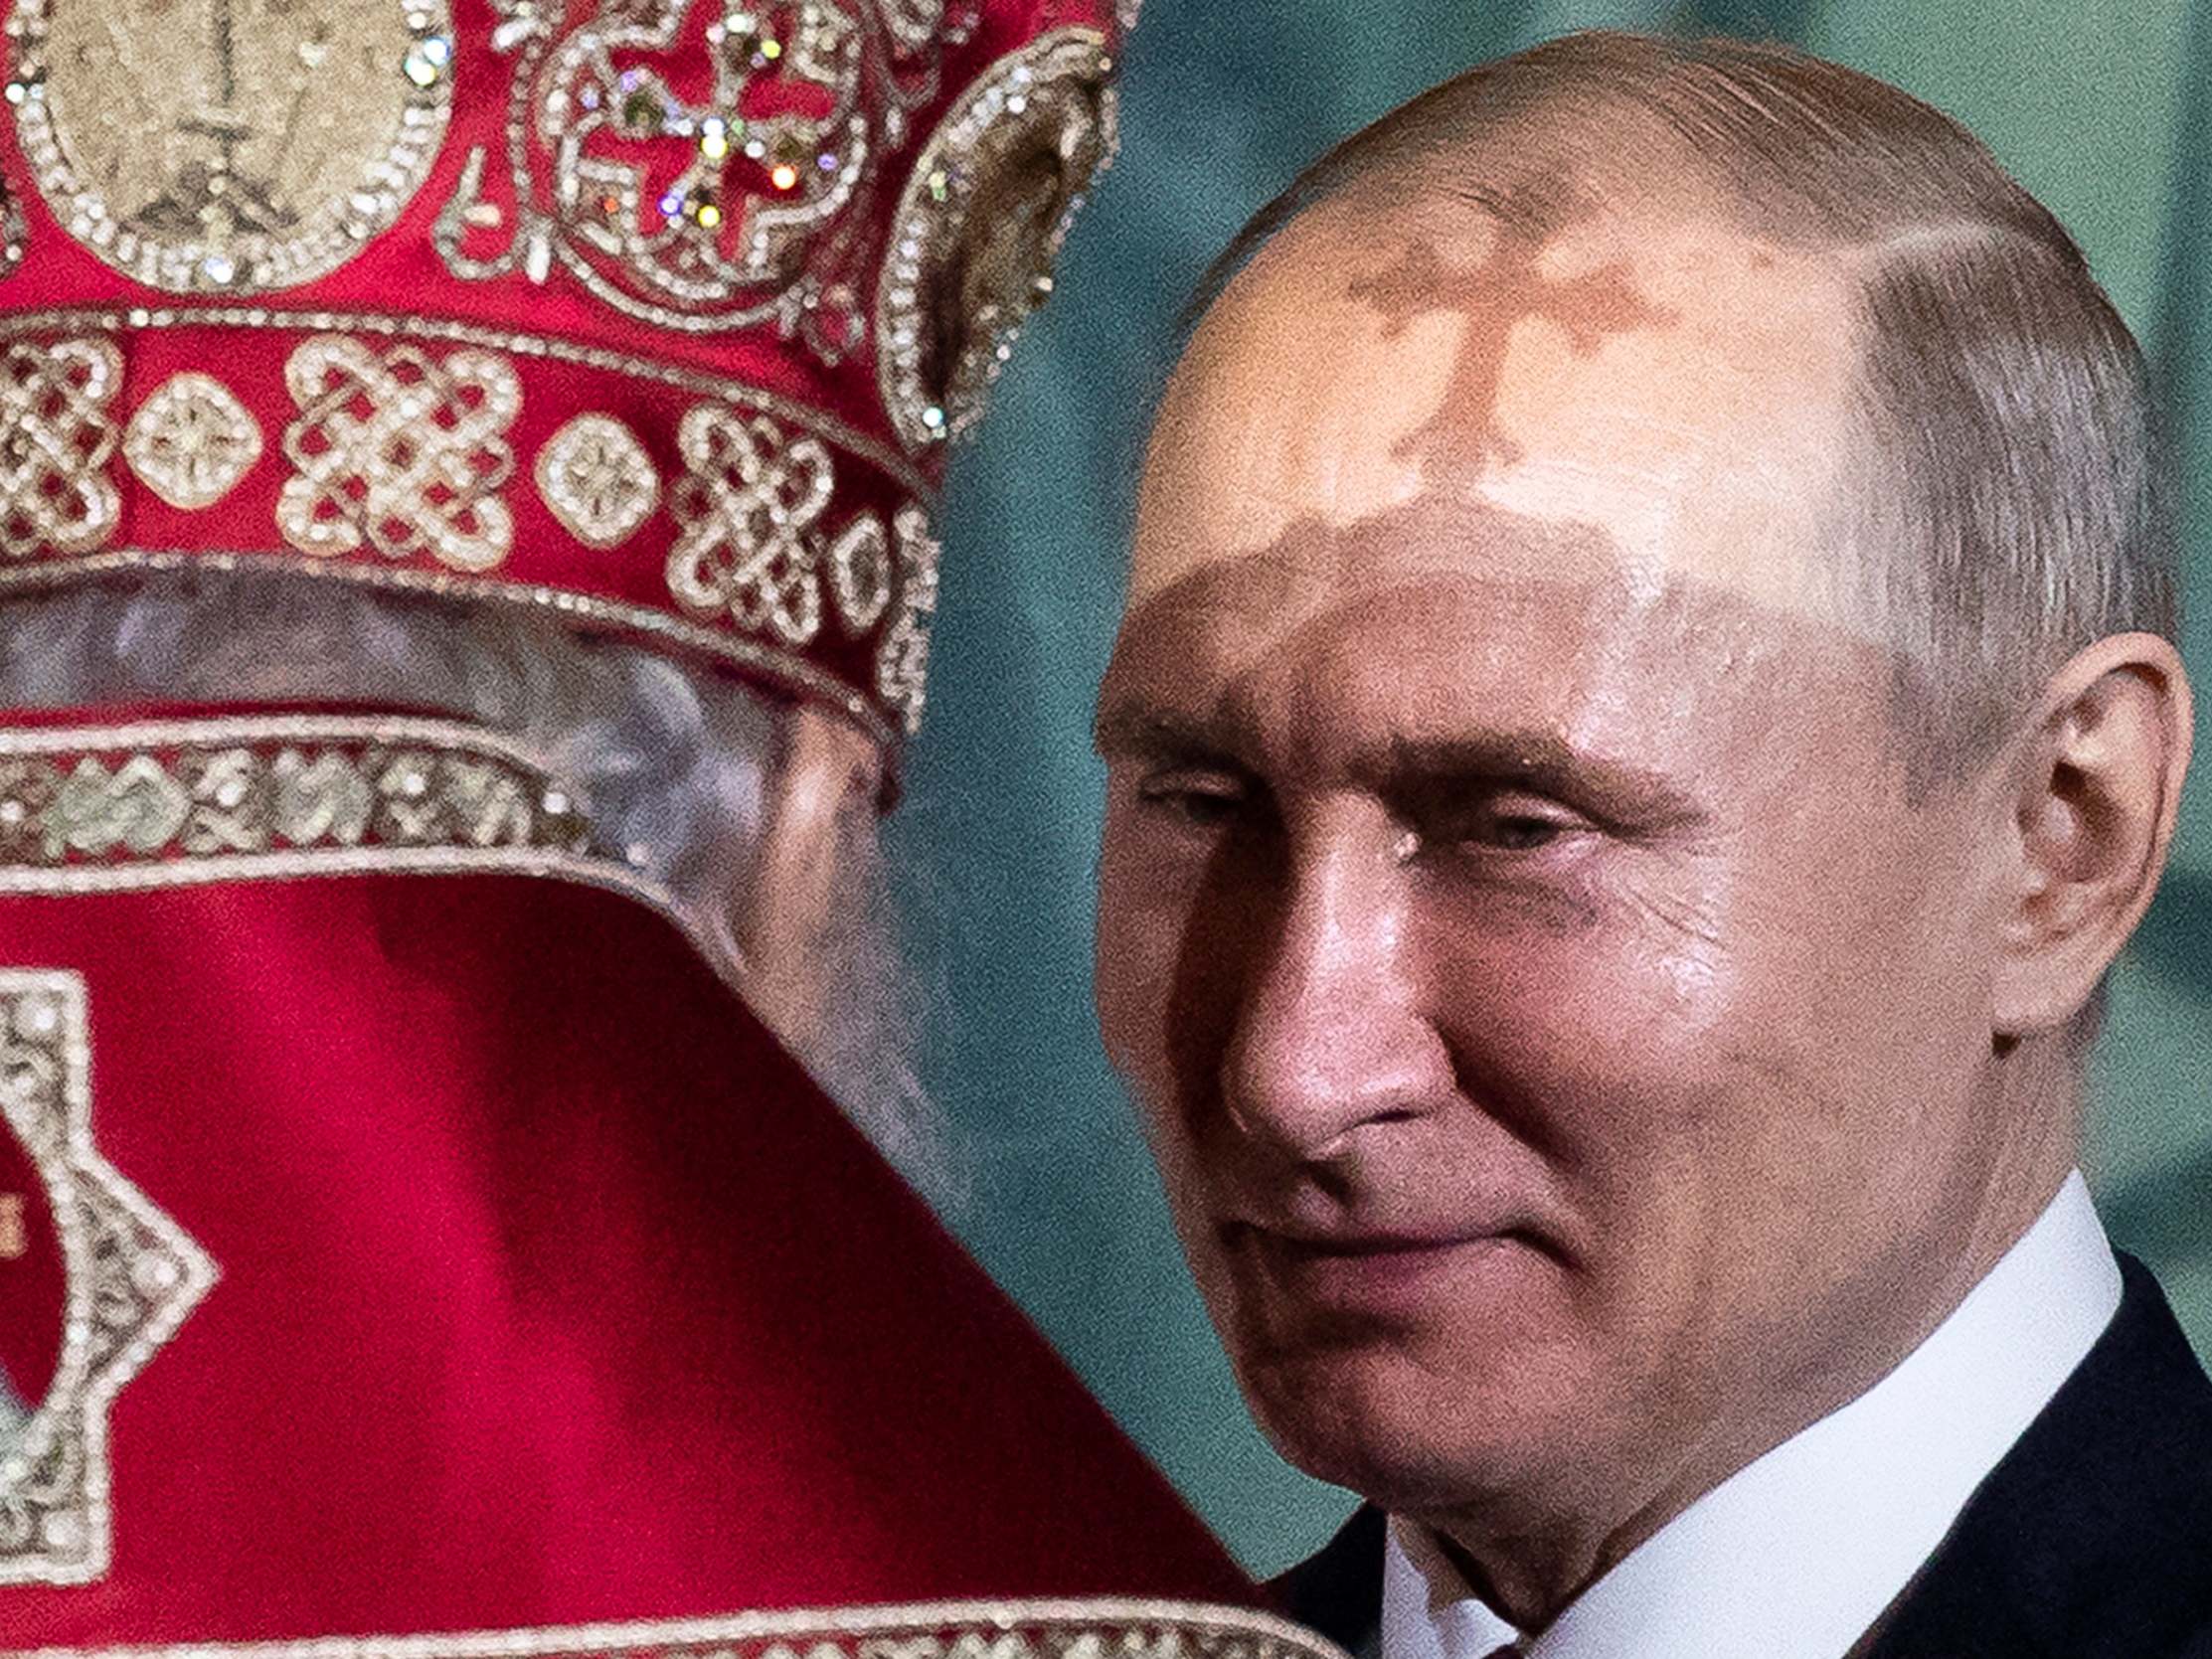 Vladimir Putin, pictured talking to the Russian Orthodox Patriarch Kirill of Moscow, has proposed constitutional amendments including a mention of God and effectively a ban on same-sex marriage